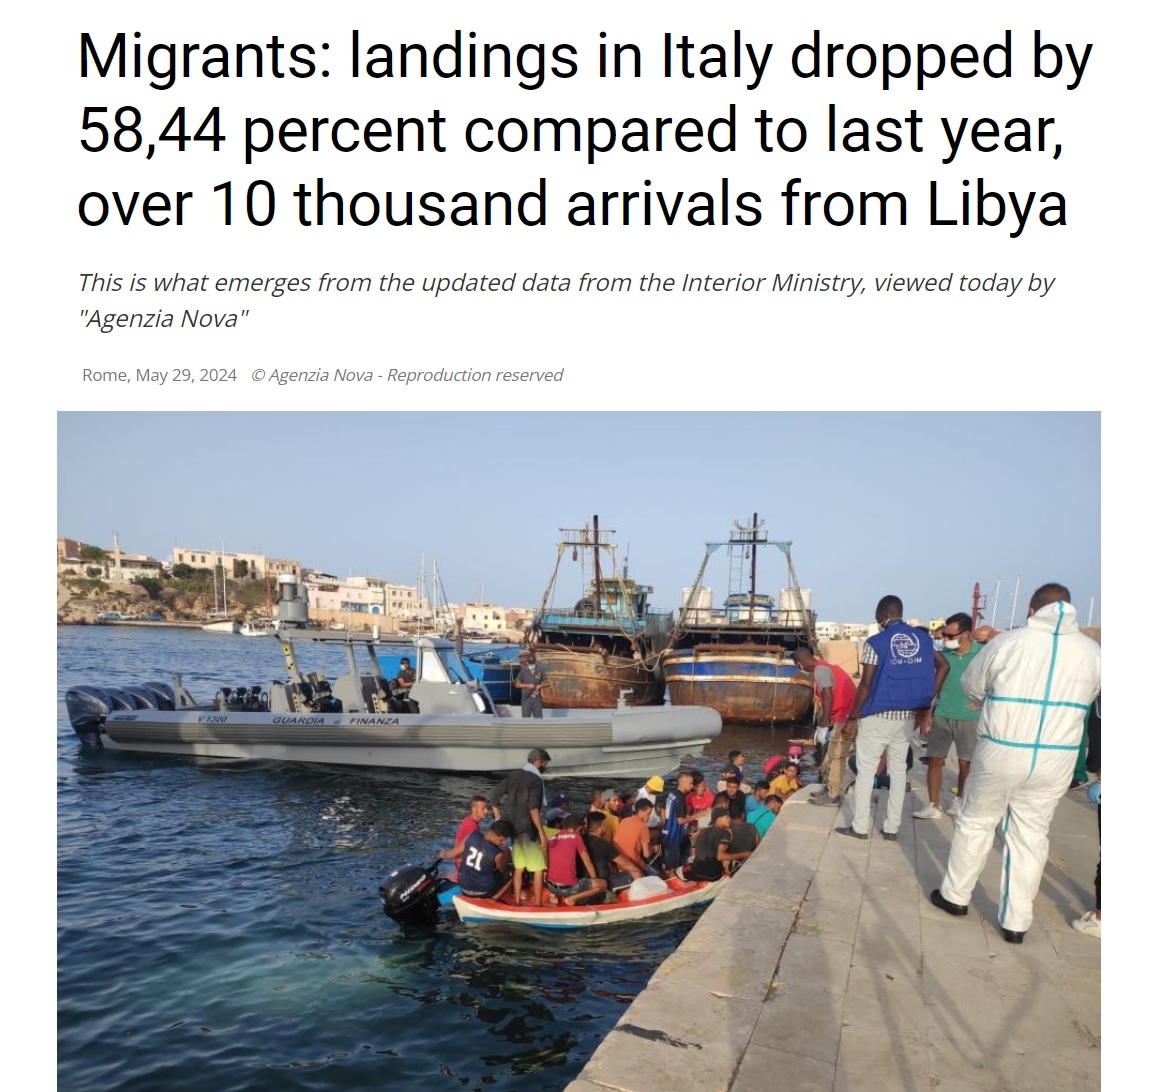 🇮🇹 #Migrants: landings in Italy dropped by 58,44 percent compared to last year, over 10 thousand arrivals from Libya. #migrantcrisis #DontTakeToTheSea #seenotrettung #Frontex agenzianova.com/en/news/migran…